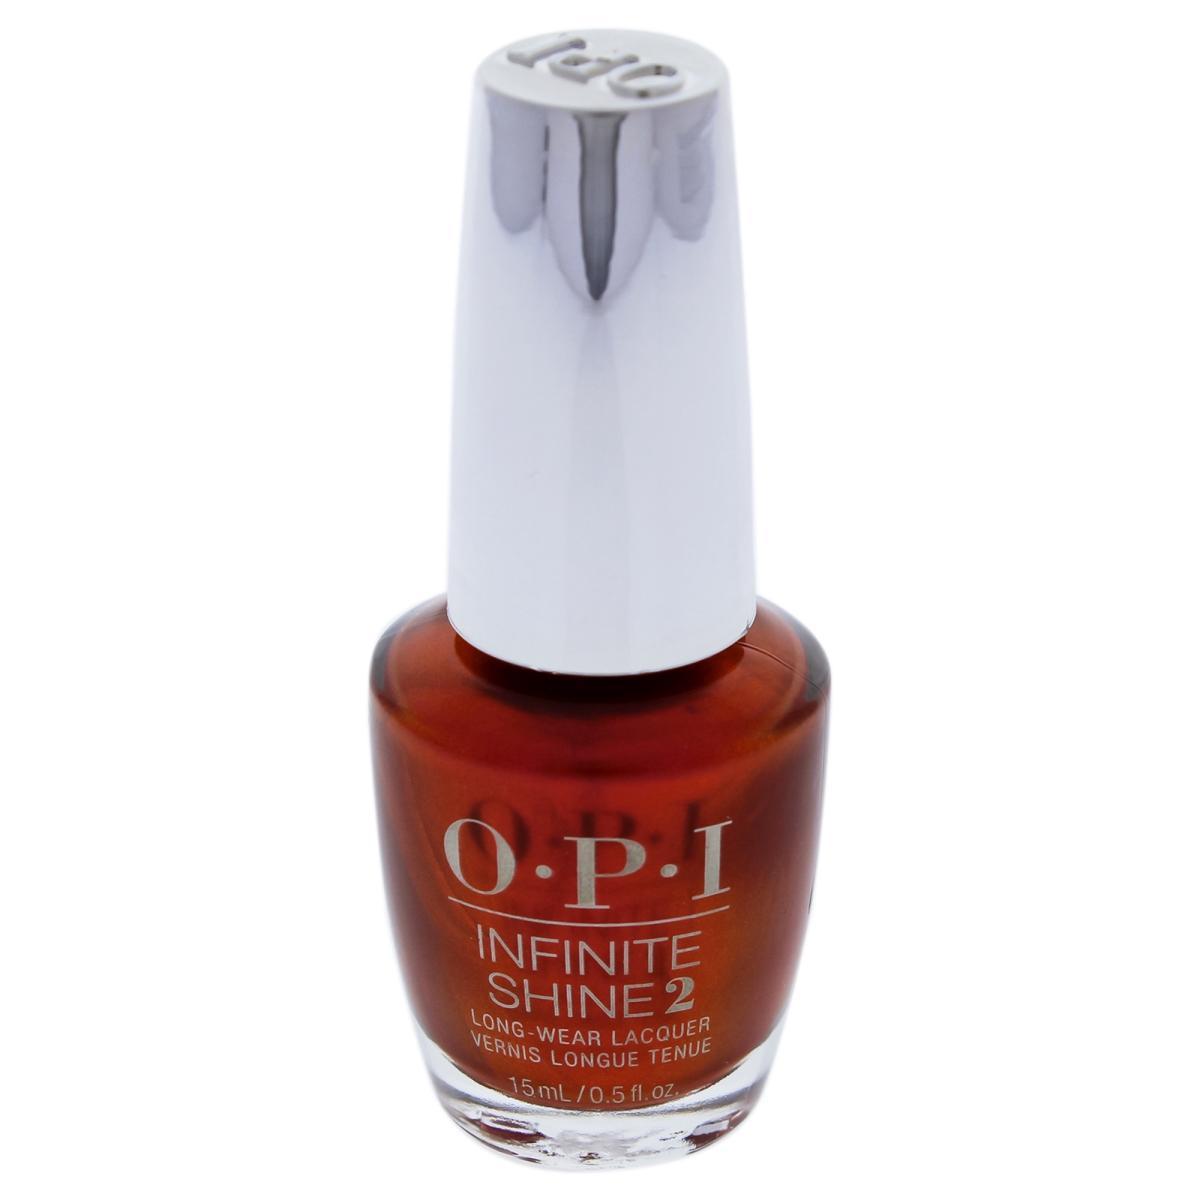 I0088999 0.5 Oz Infinite Shine 2 Long-wear Lacquer Nail Polish For Womens - Isl L21 Now Museum Now You Do Not